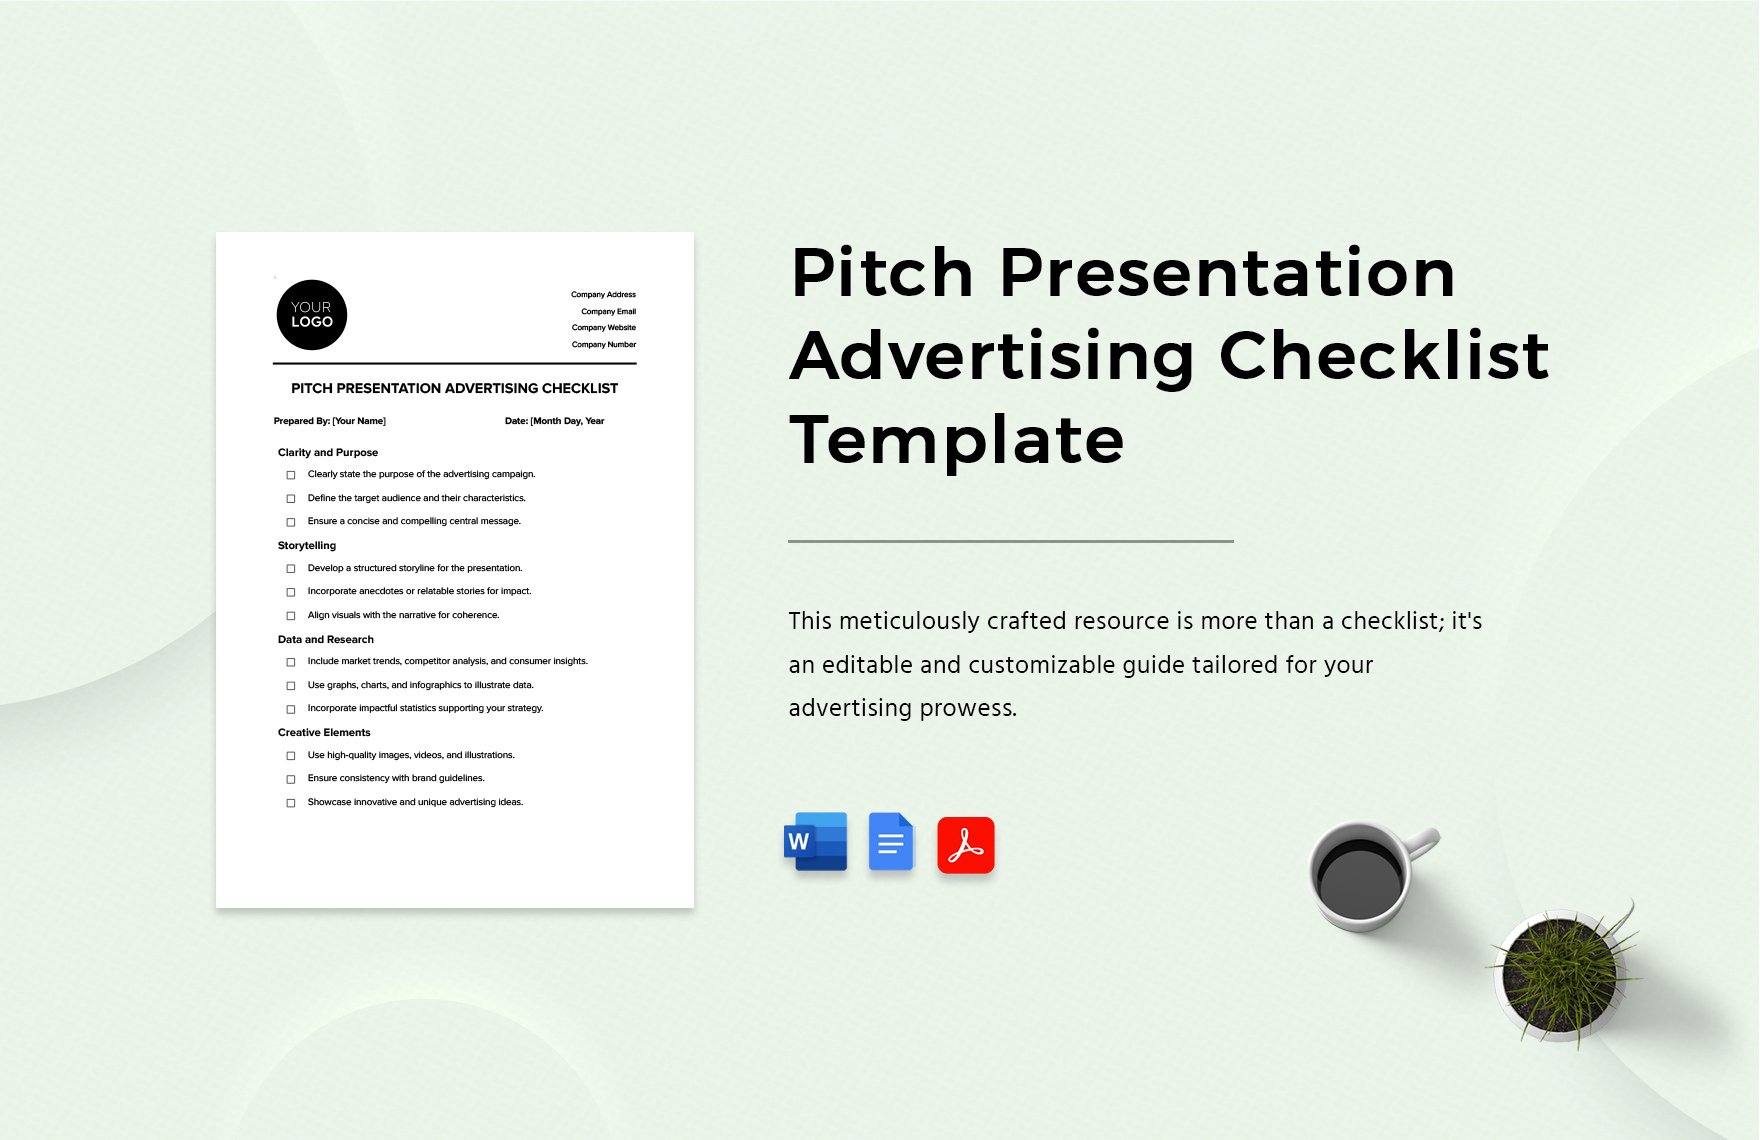 Pitch Presentation Advertising Checklist Template in Word, Google Docs, PDF